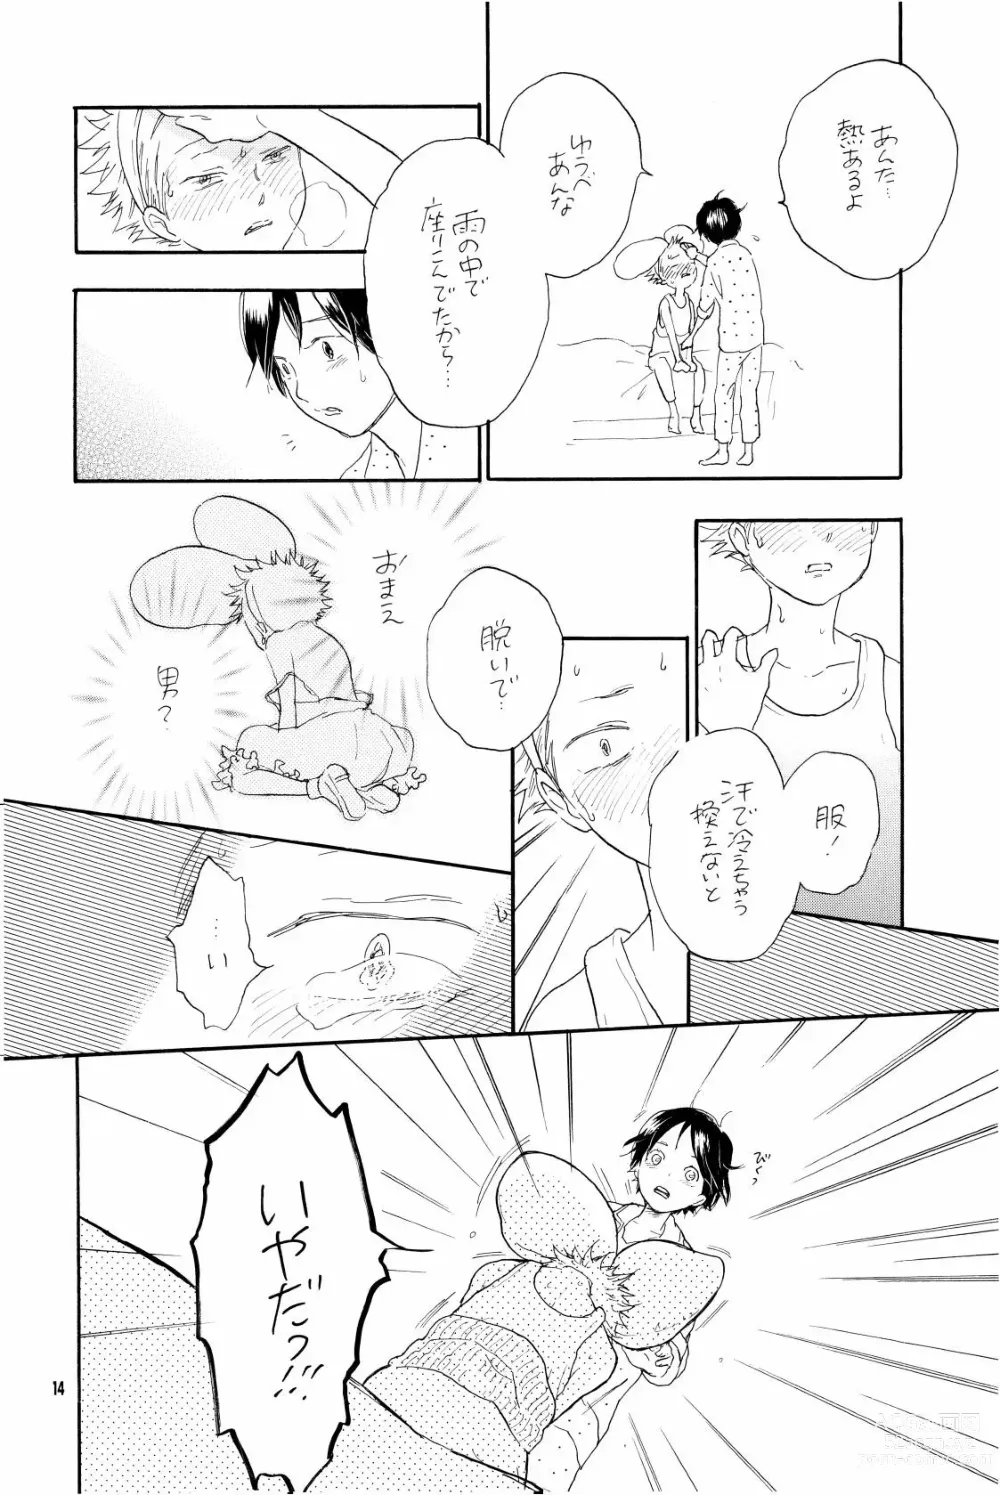 Page 13 of doujinshi your song